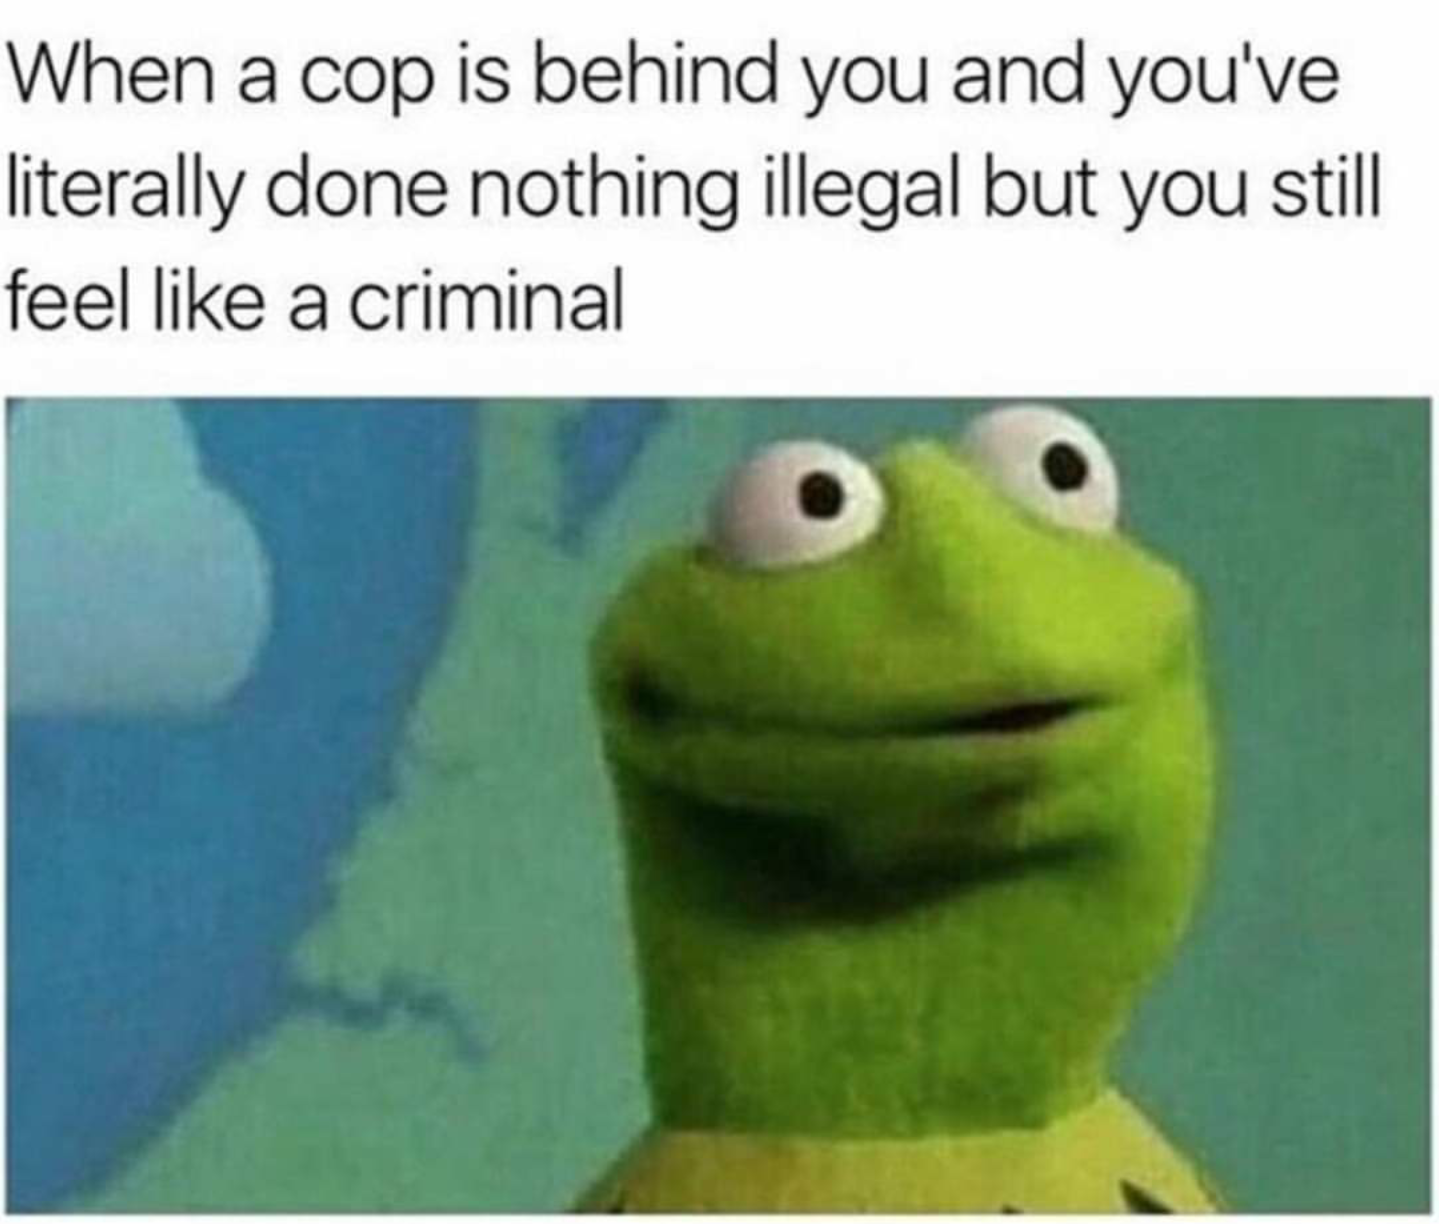 relatable memes - When a cop is behind you and you've literally done nothing illegal but you still feel a criminal